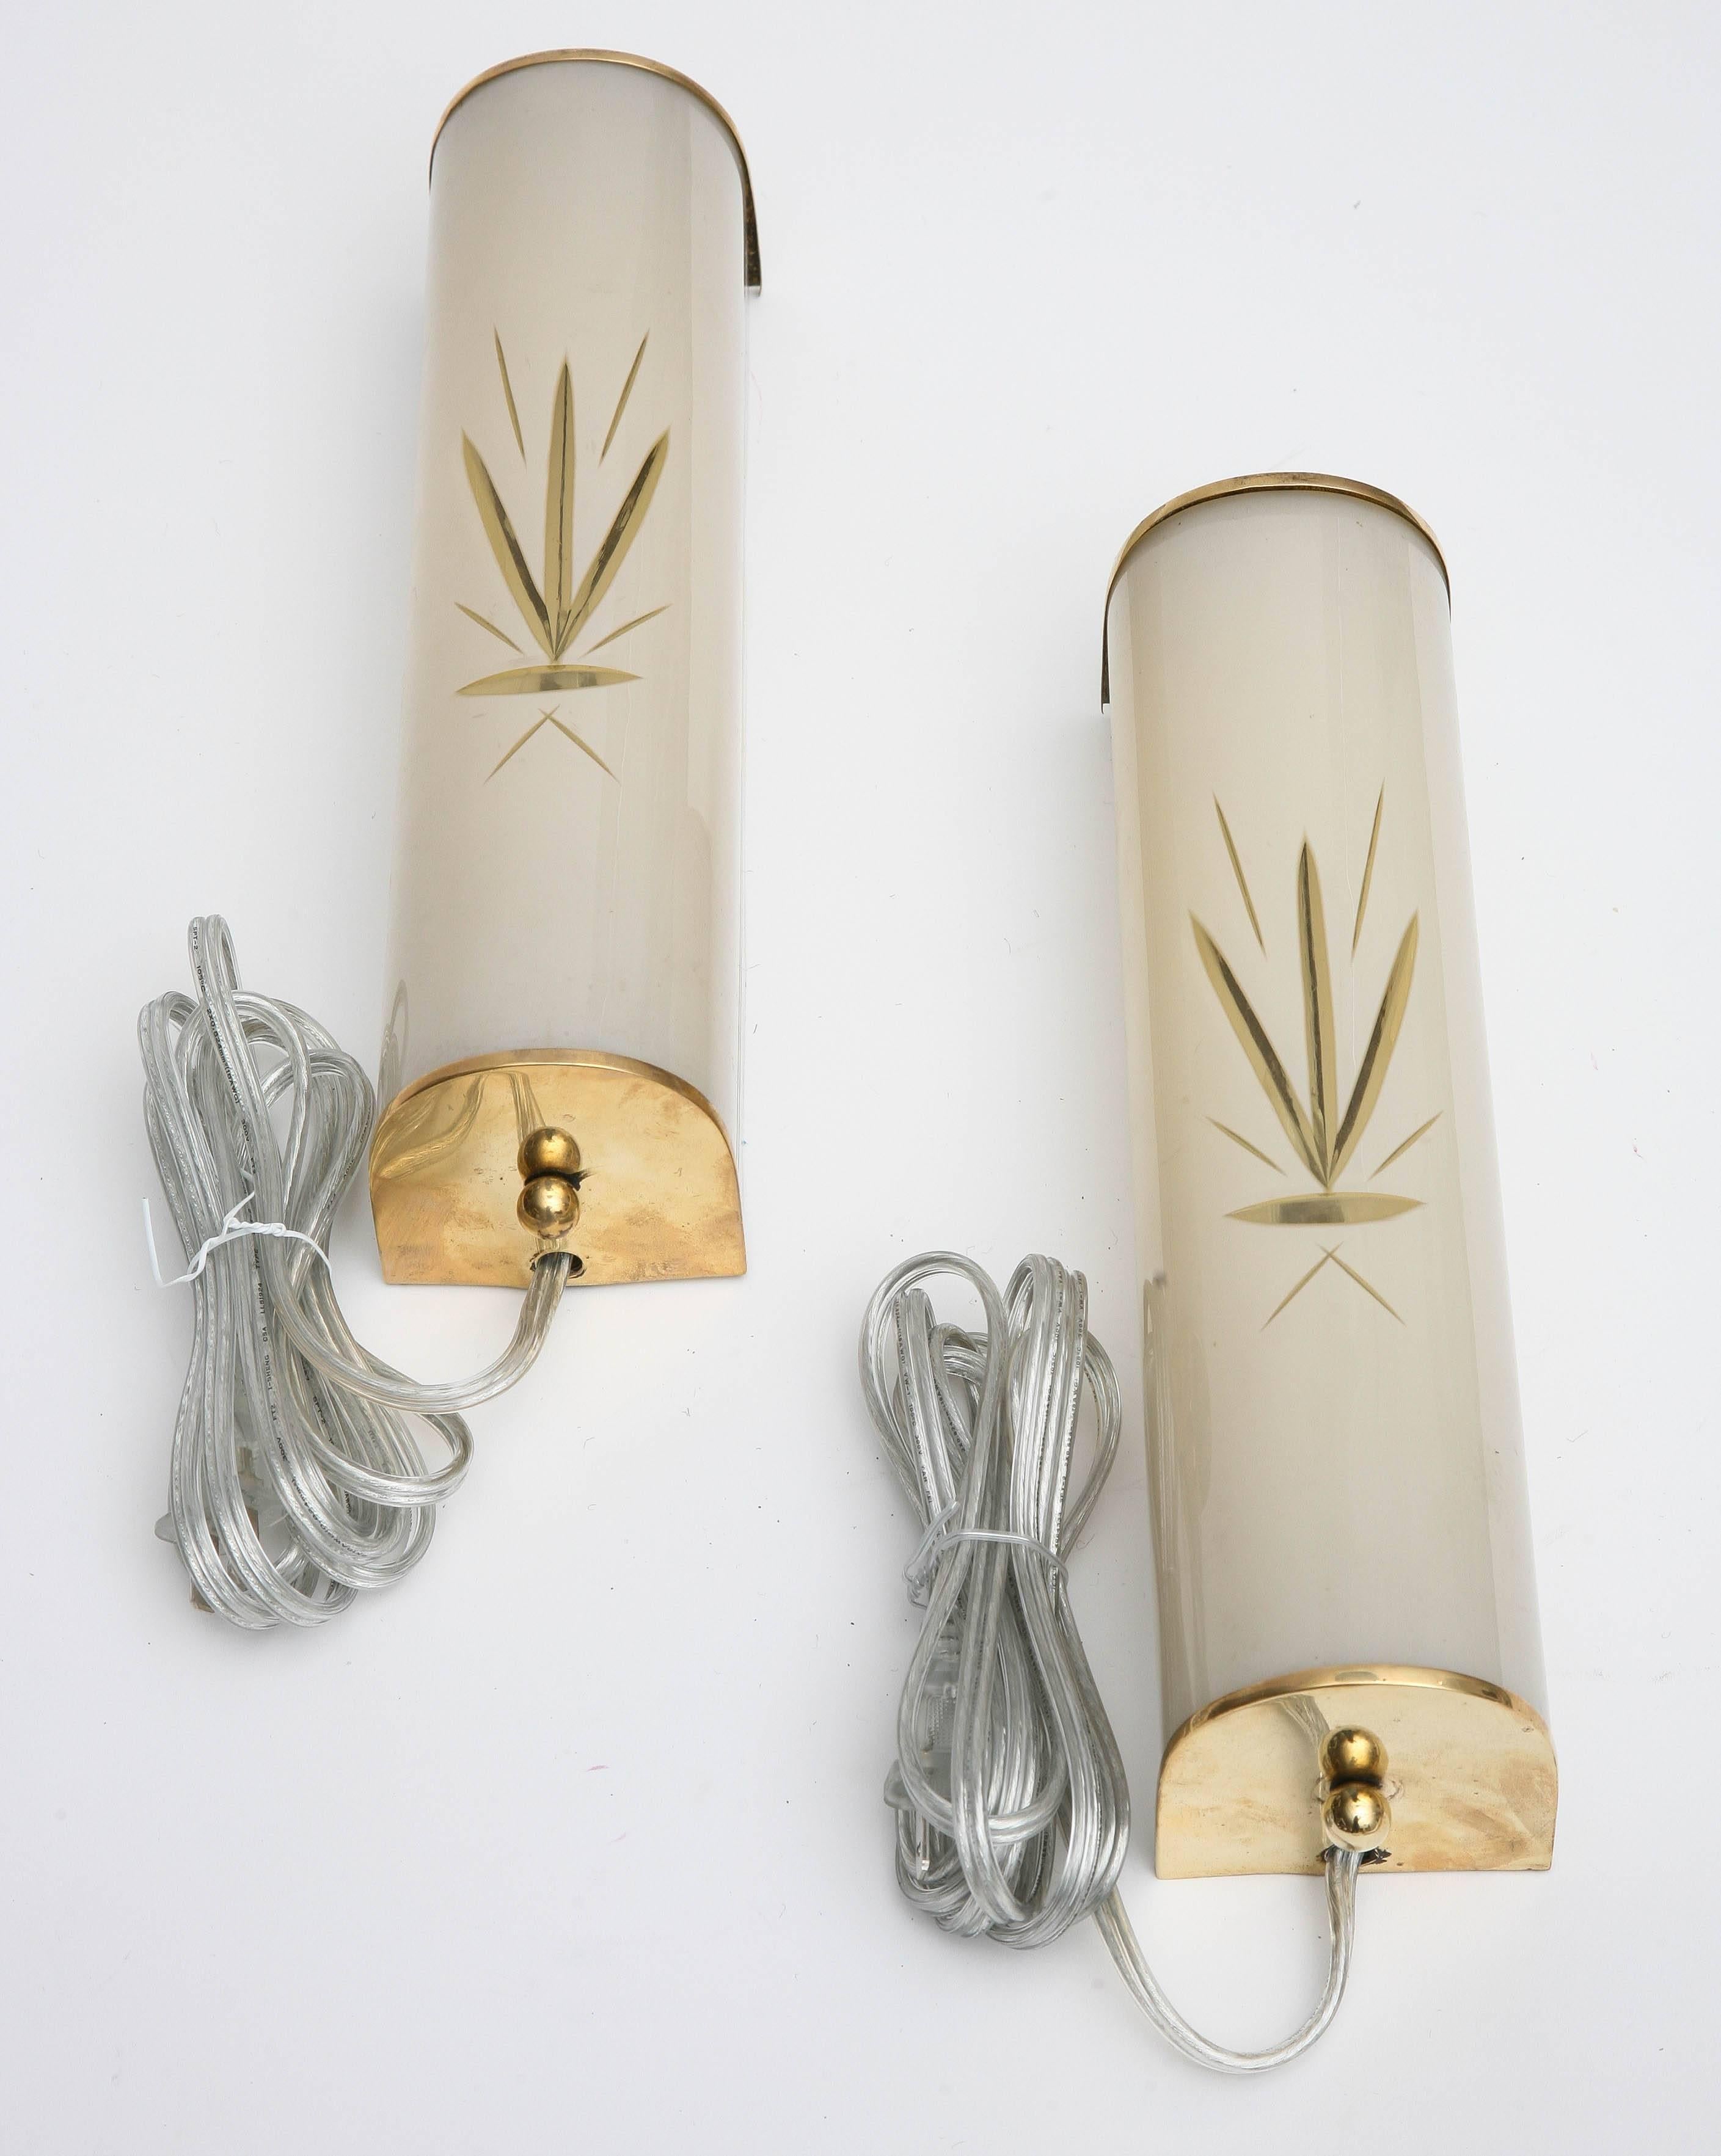 Pair of brass wall sconces with frosted glass and sand etched design in the
glass, off-white color glass, brass top and bottom trim, one candelabra bulb per sconce, 40 watts max
Wired to US standard, 11.50 in H x 3.00 in W x 3.00 in D.